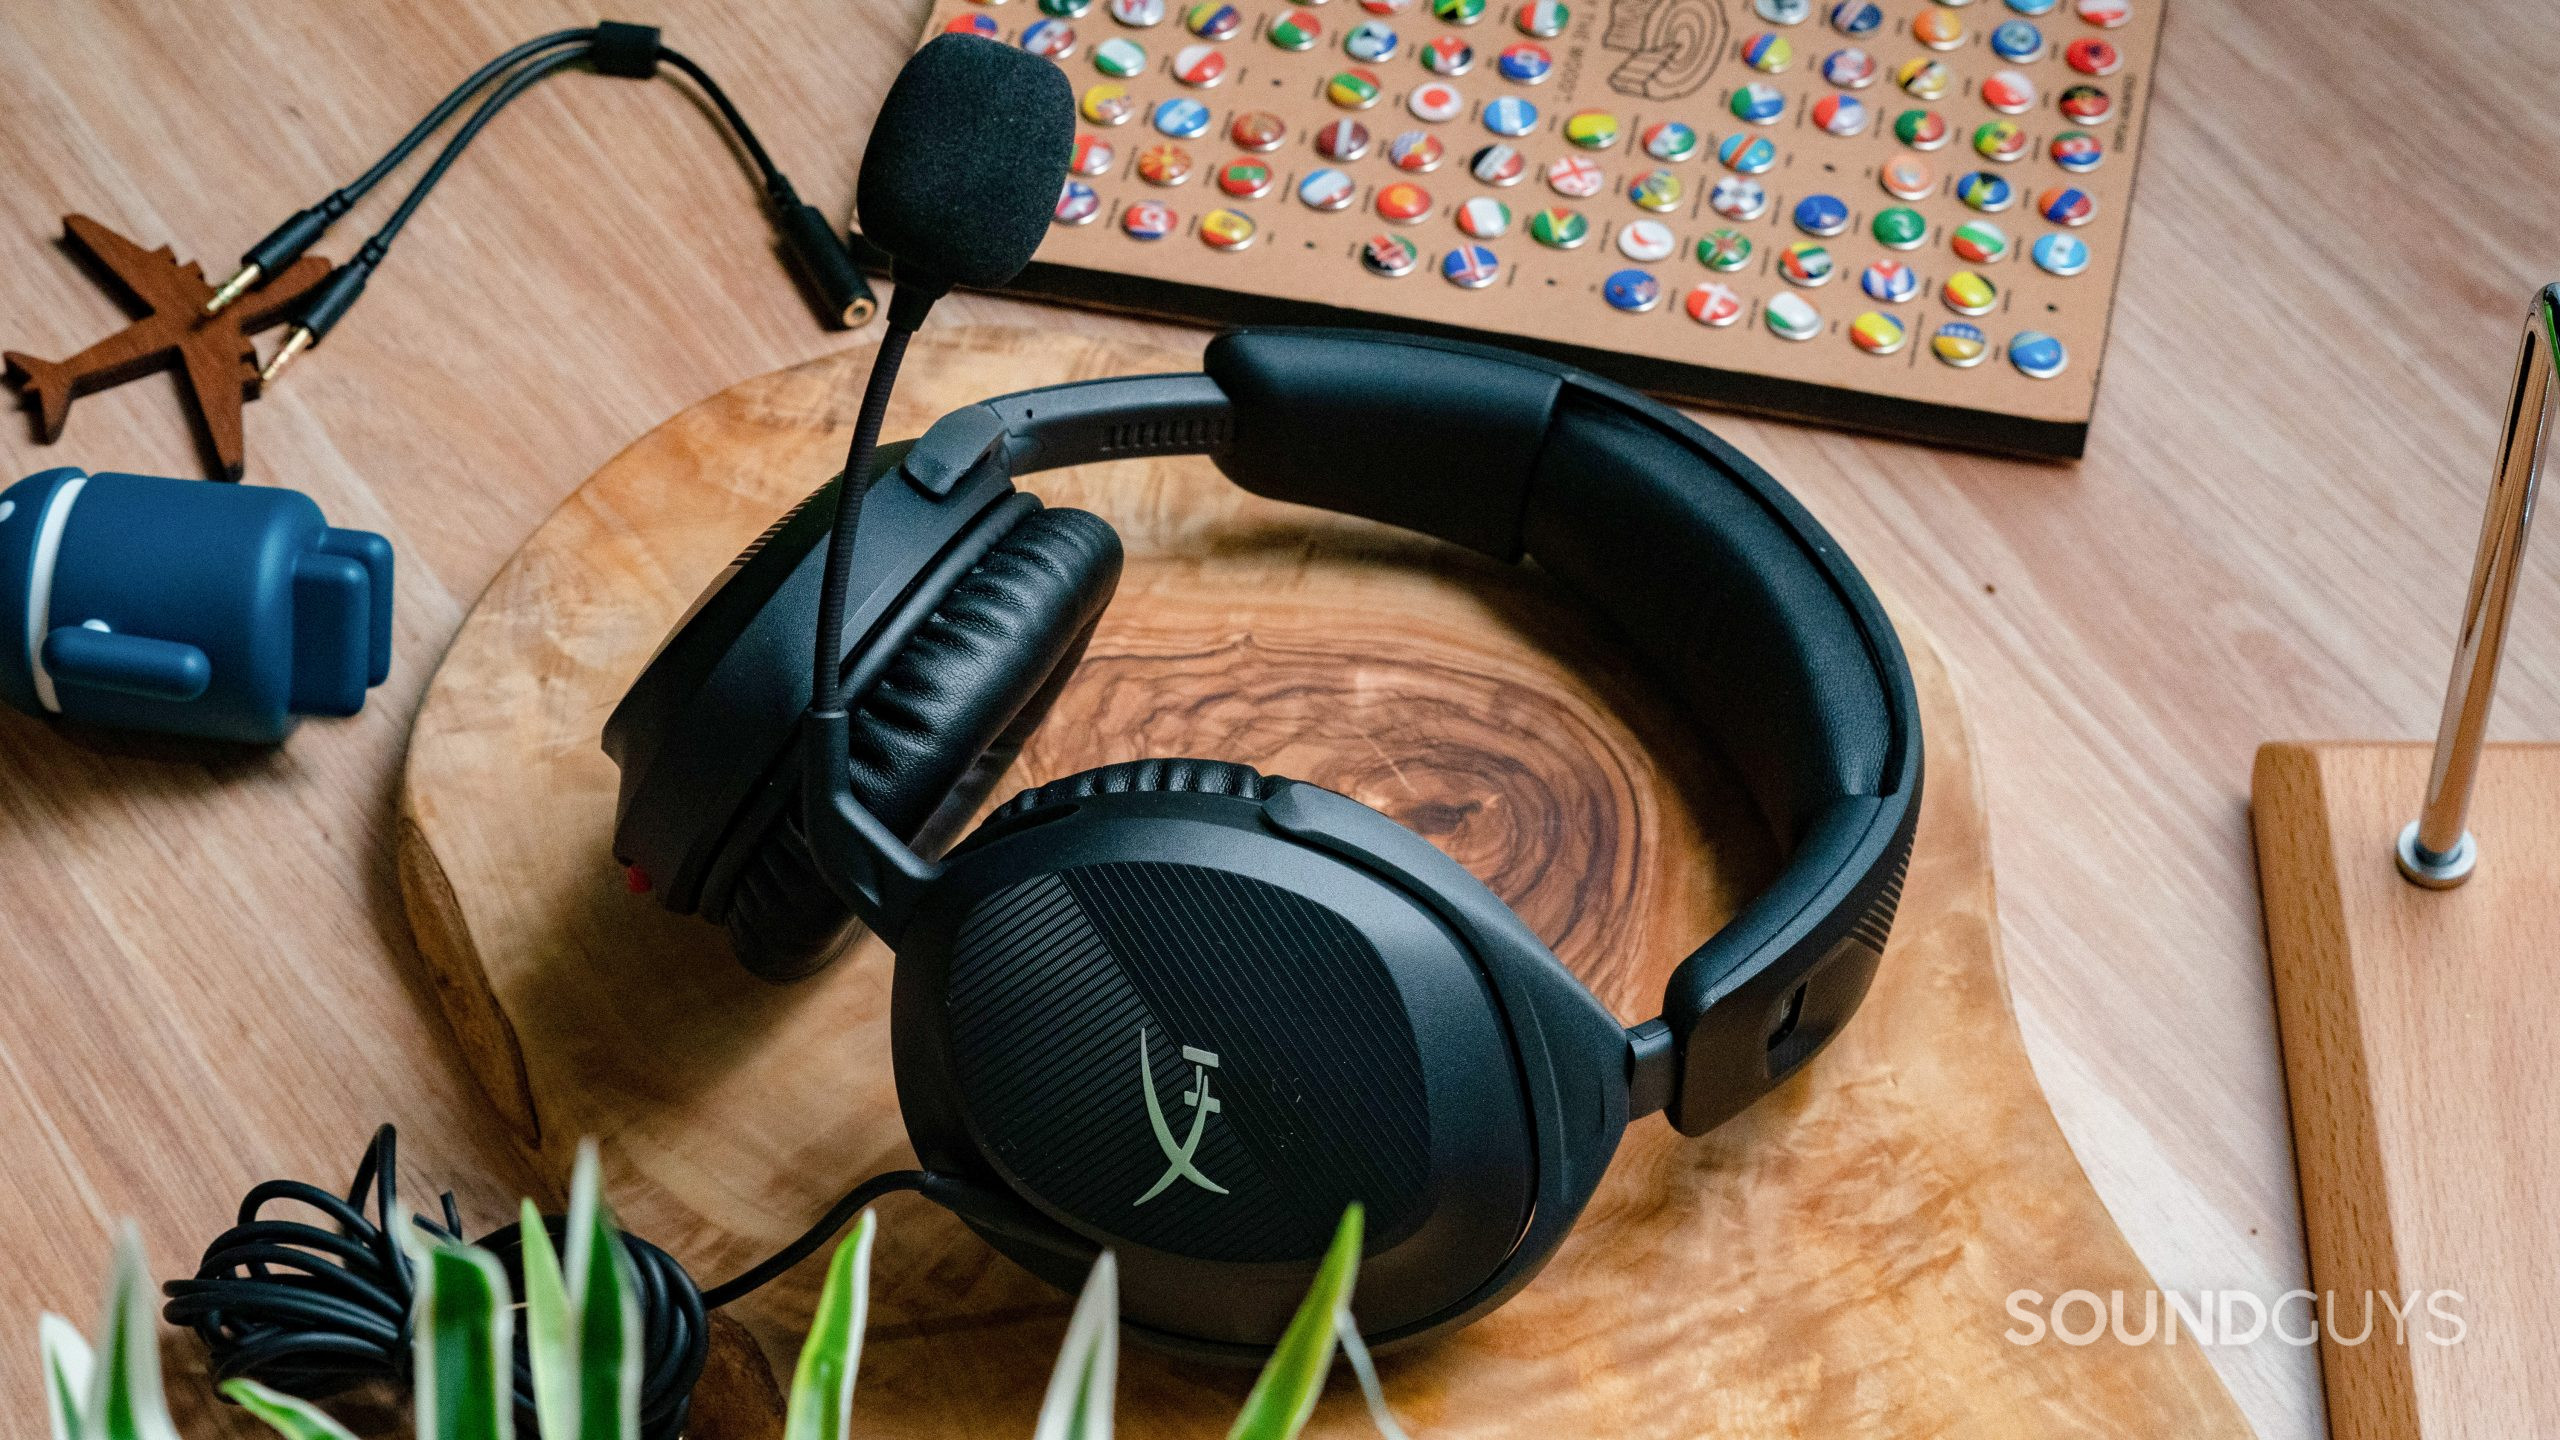 The HyperX Cloud Stinger 2 sitting on a wooden tabletop with the microphone in prominent view.